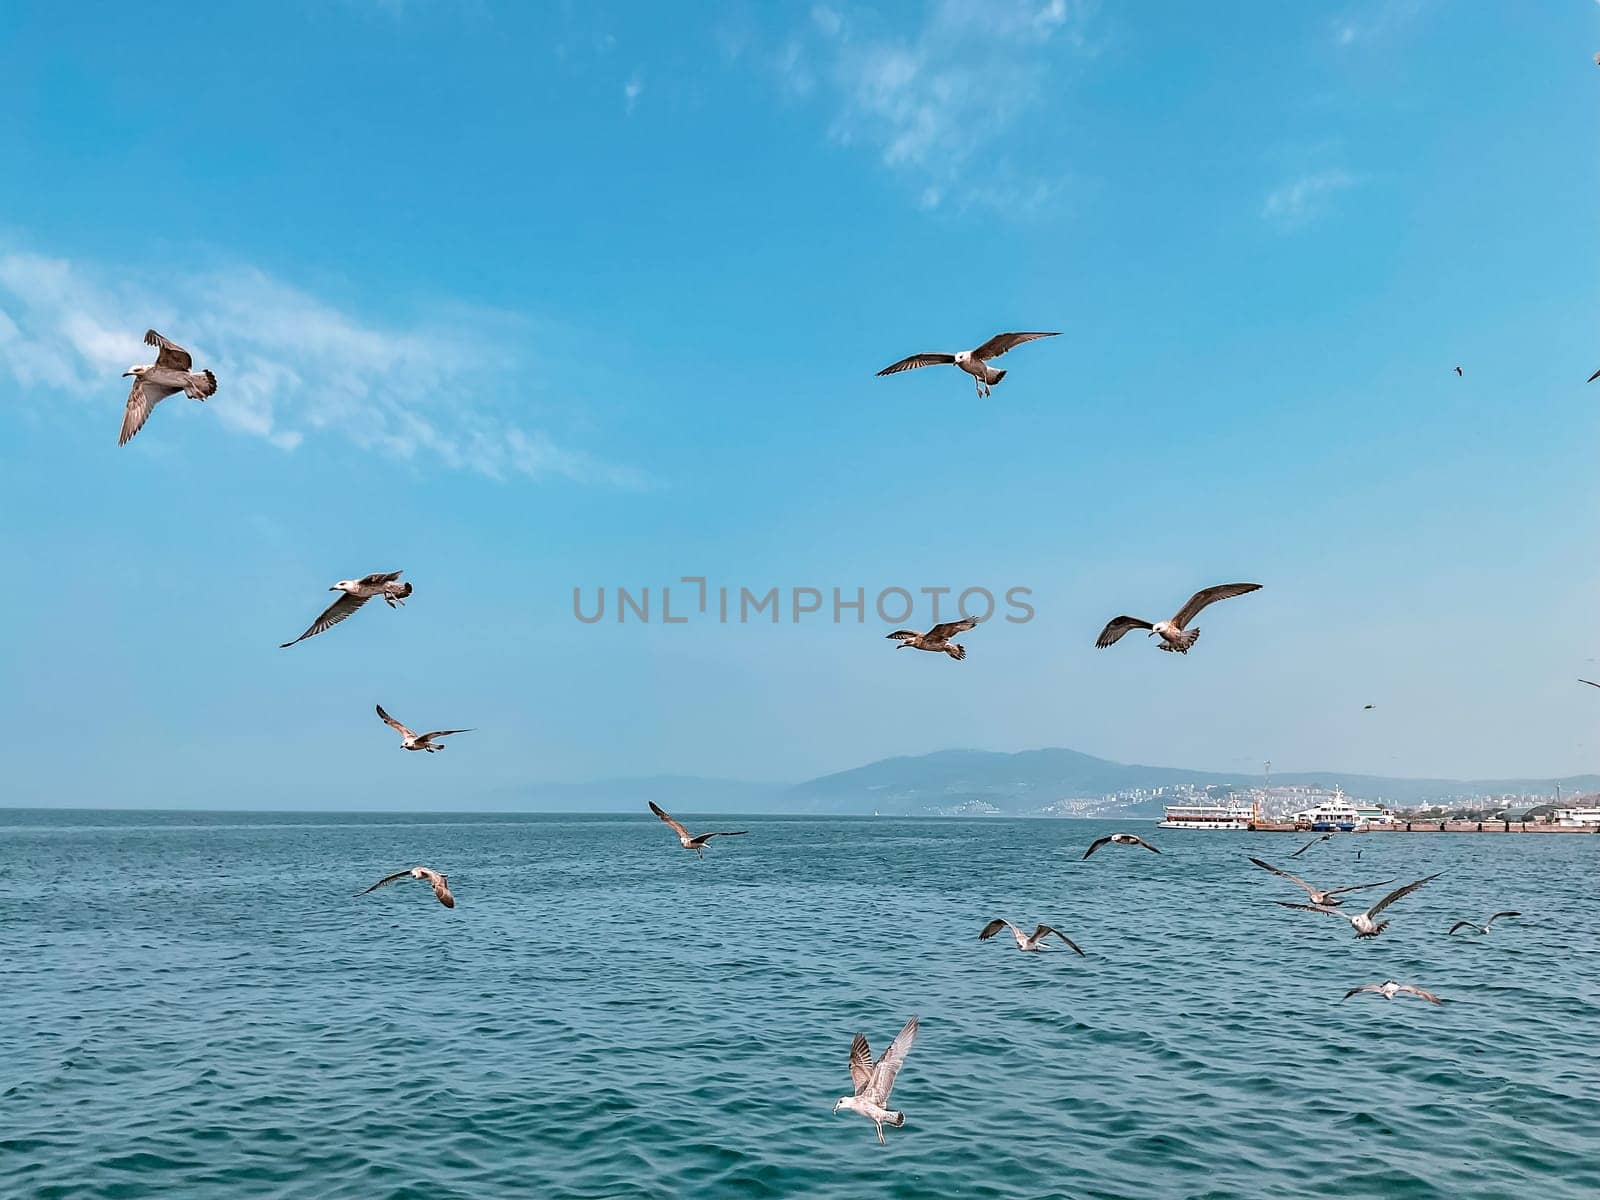 Seagulls fly in the blue sky over the blue sea against the backdrop of mountains by Lunnica